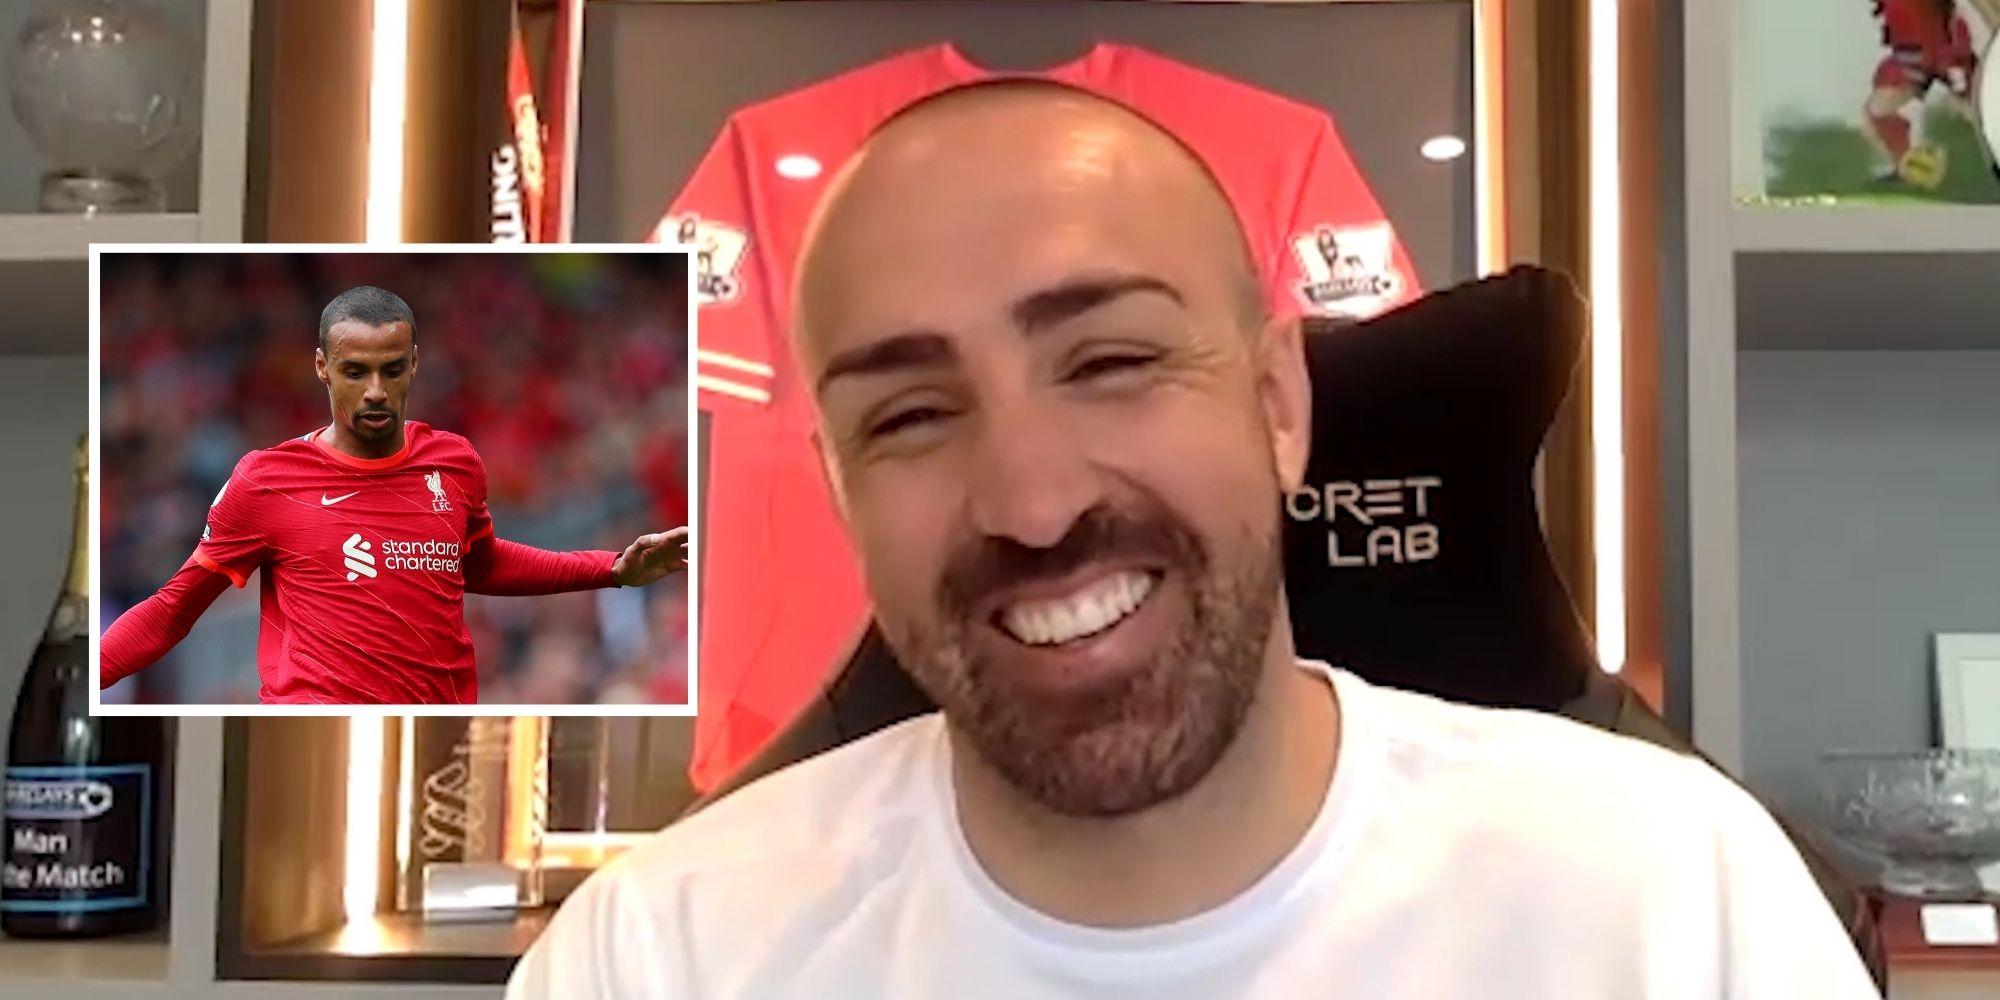 Jose Enrique says ‘people maybe don’t appreciate’ one ‘incredible’ Liverpool star – Klopp agrees he’s underrated